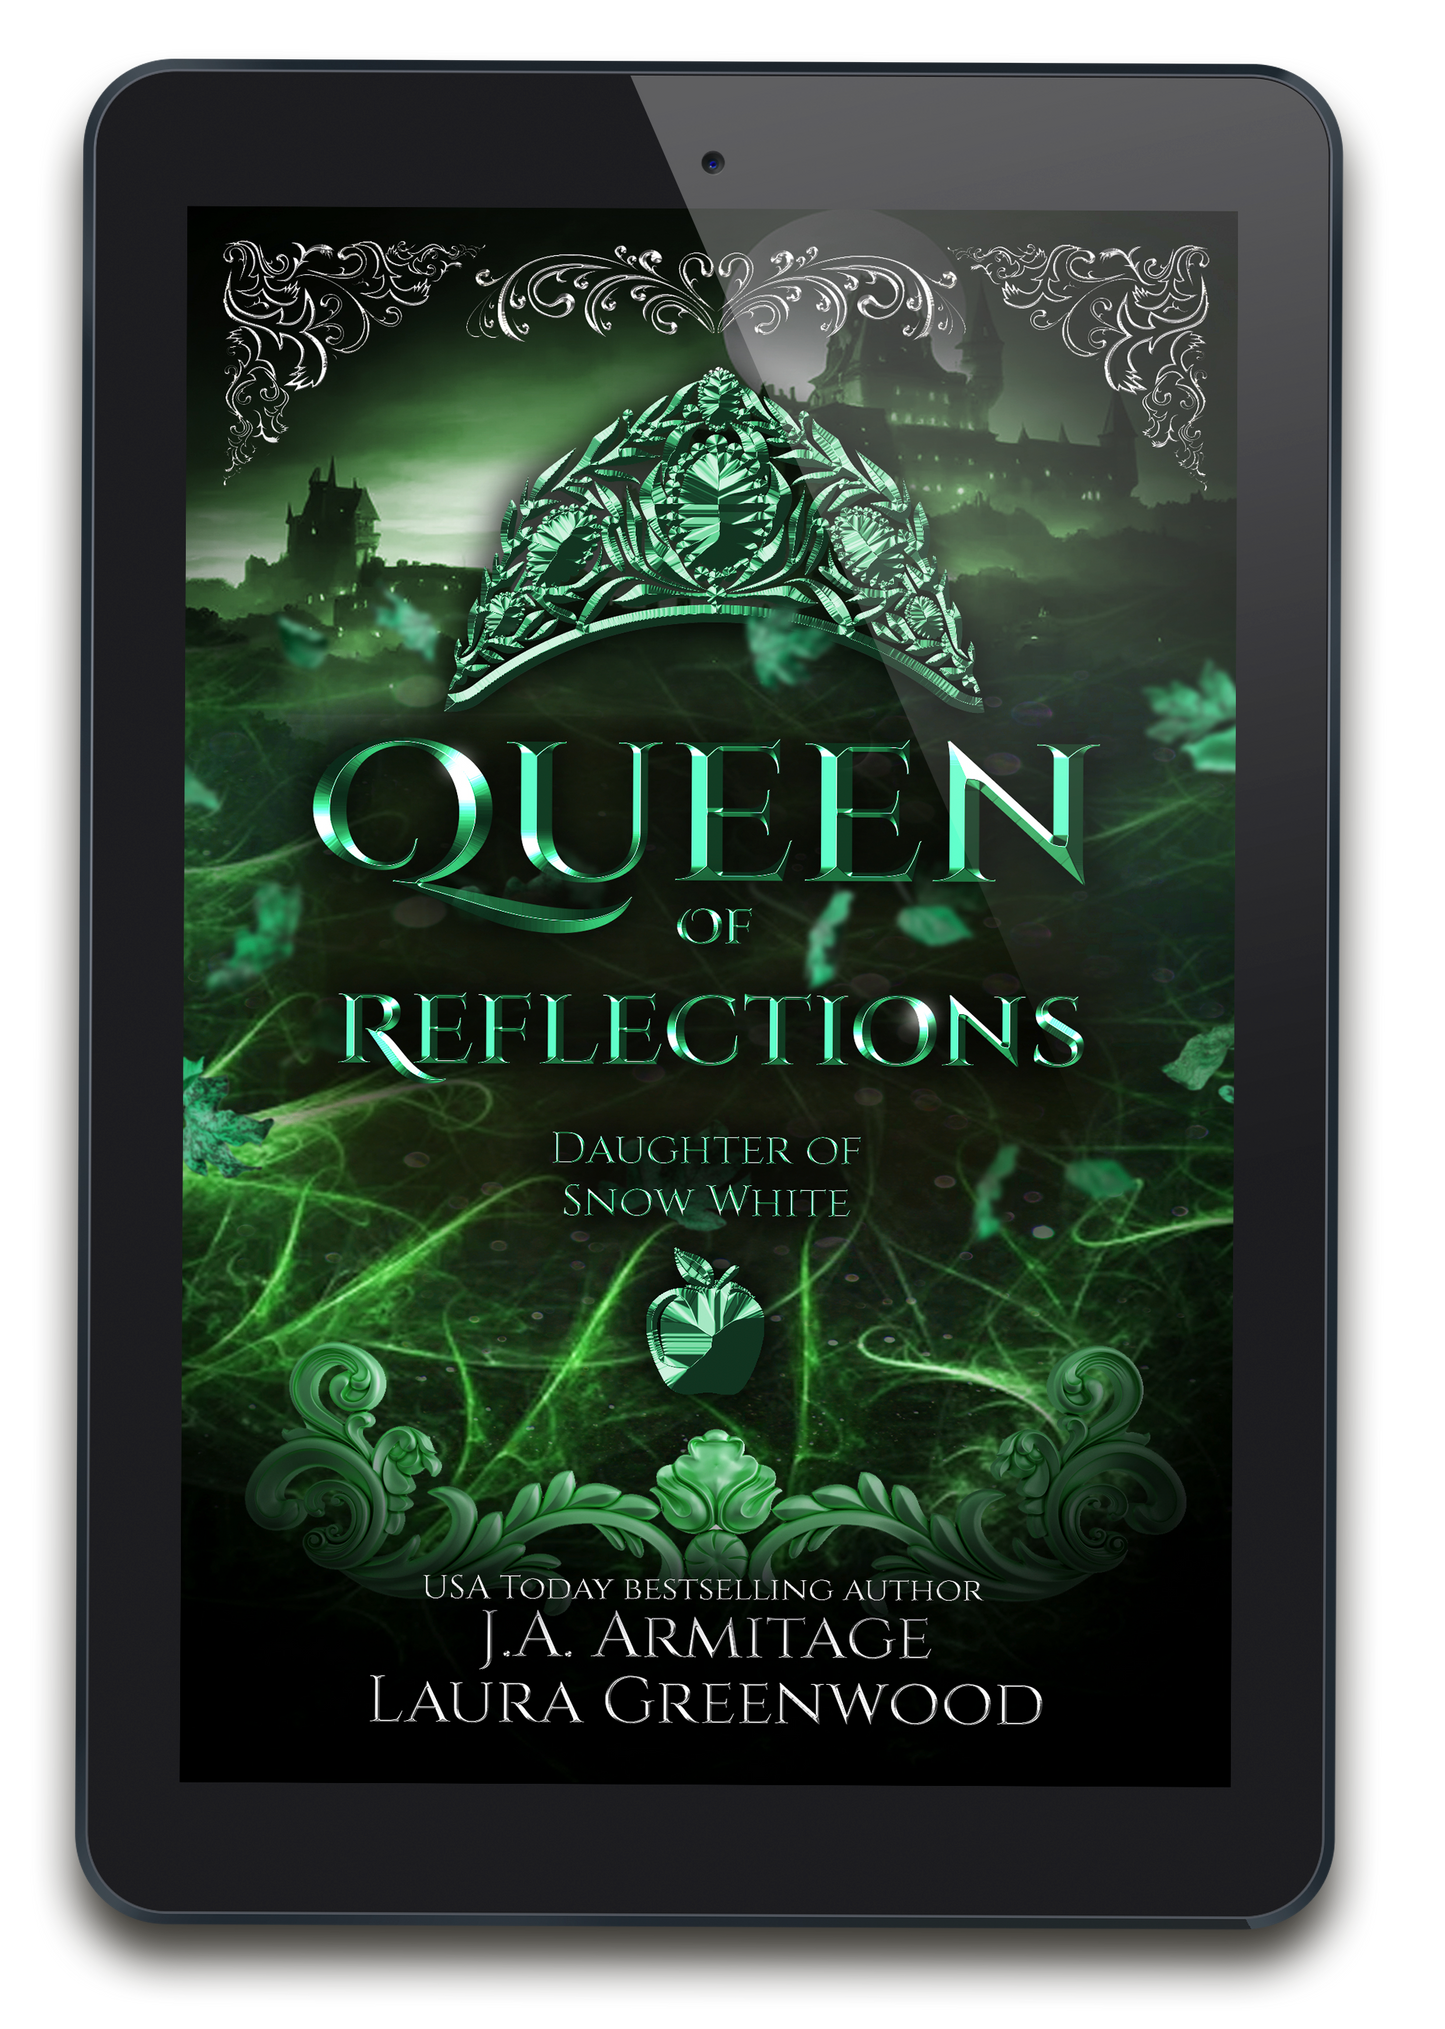 QUEEN OF REFLECTIONS (Daughter of Snow White) eBOOK